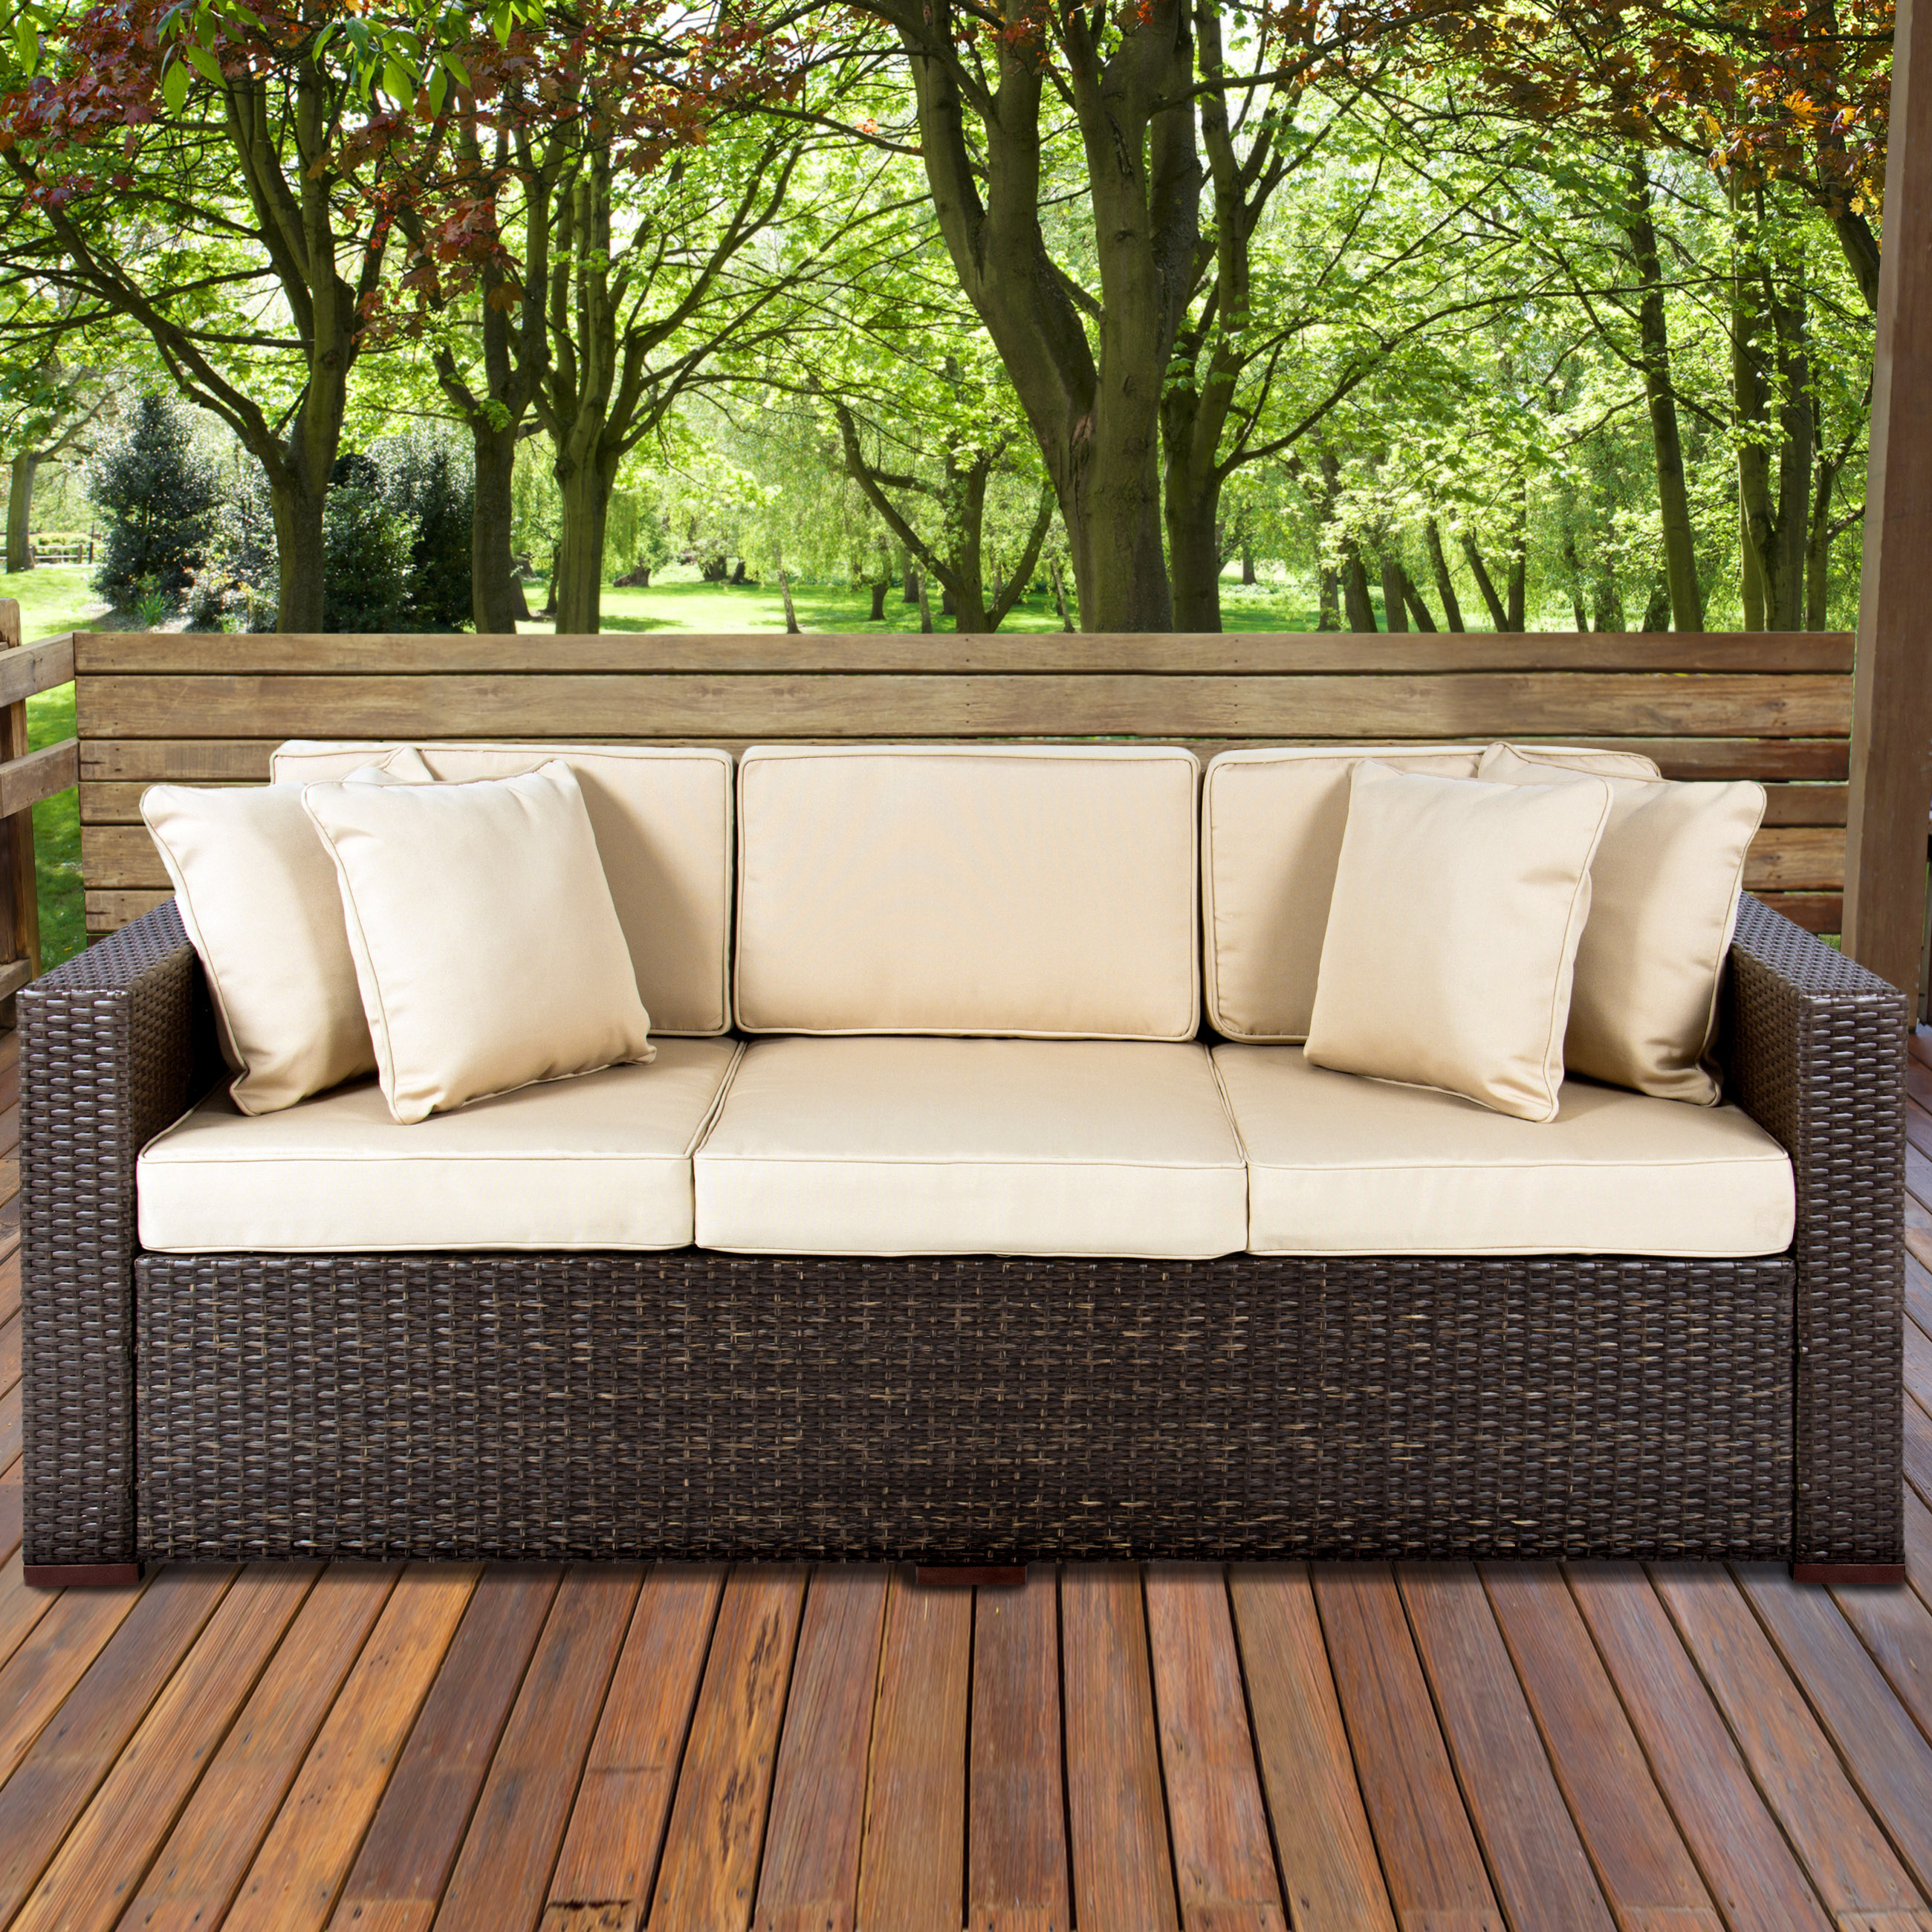 outdoor couch best choice products outdoor wicker patio furniture sofa 3 seater luxury RQBROEV